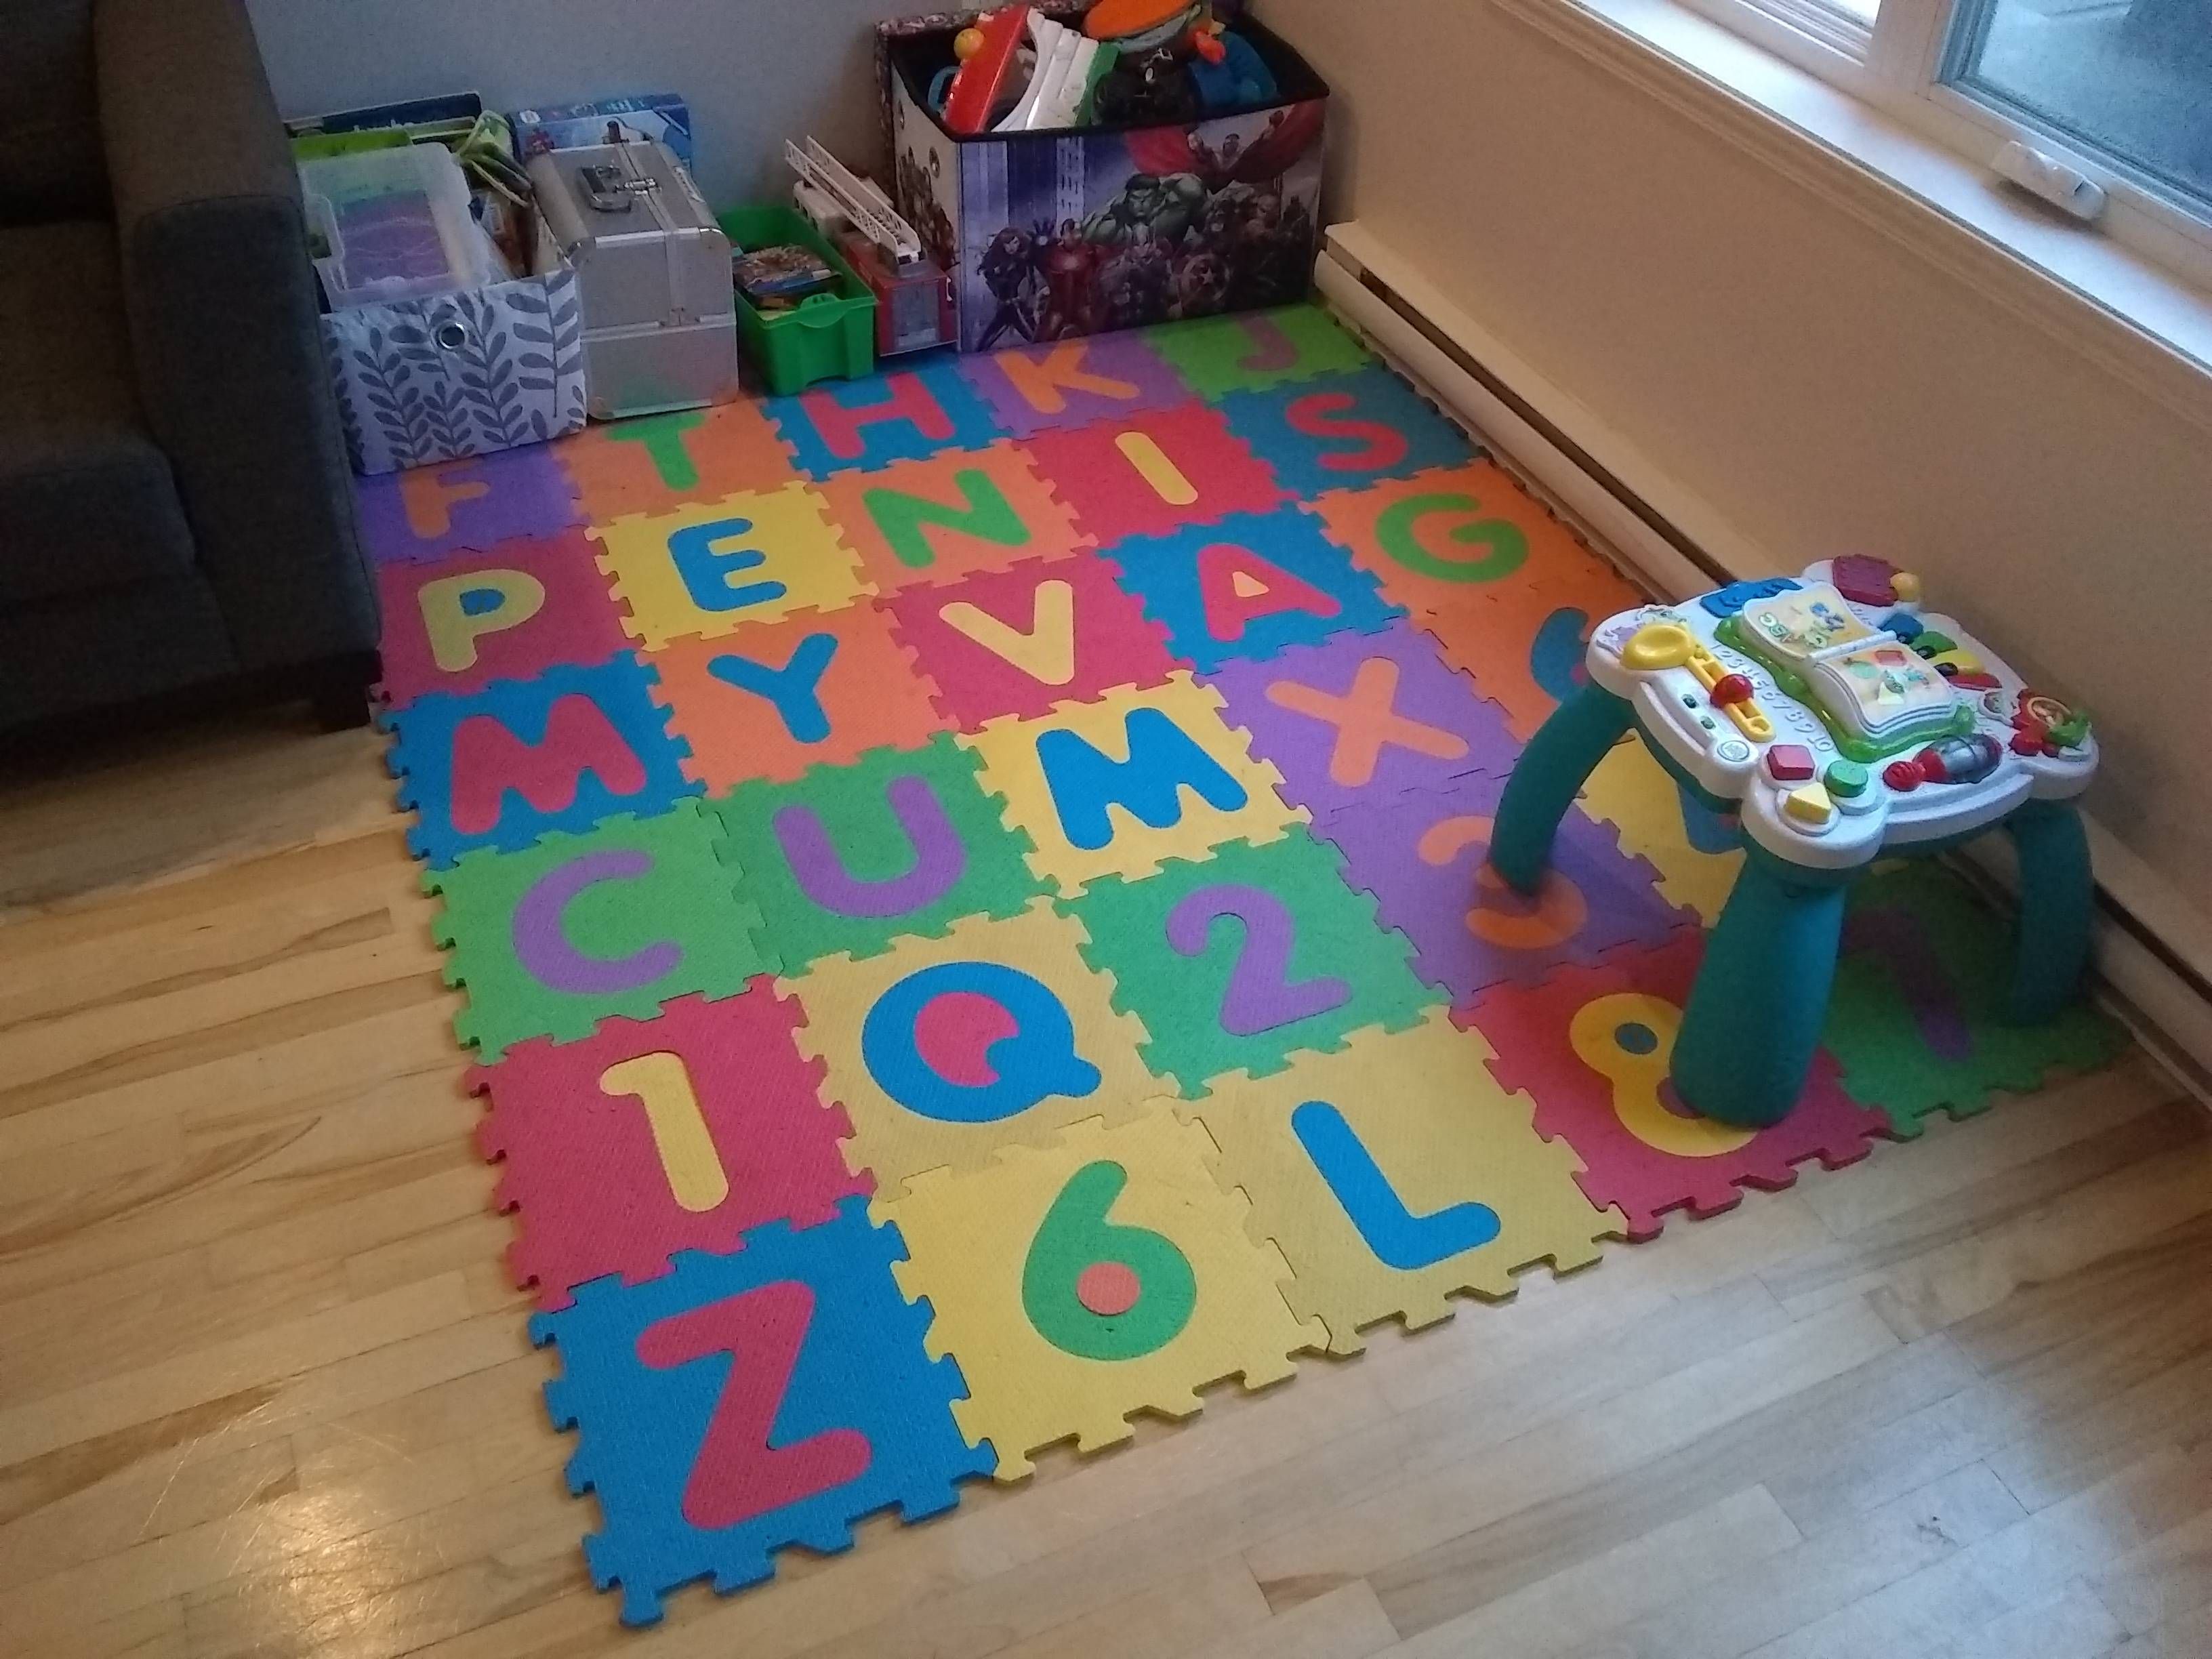 I've rearranged the kid's play mat a month ago and the wife still hasn't noticed.